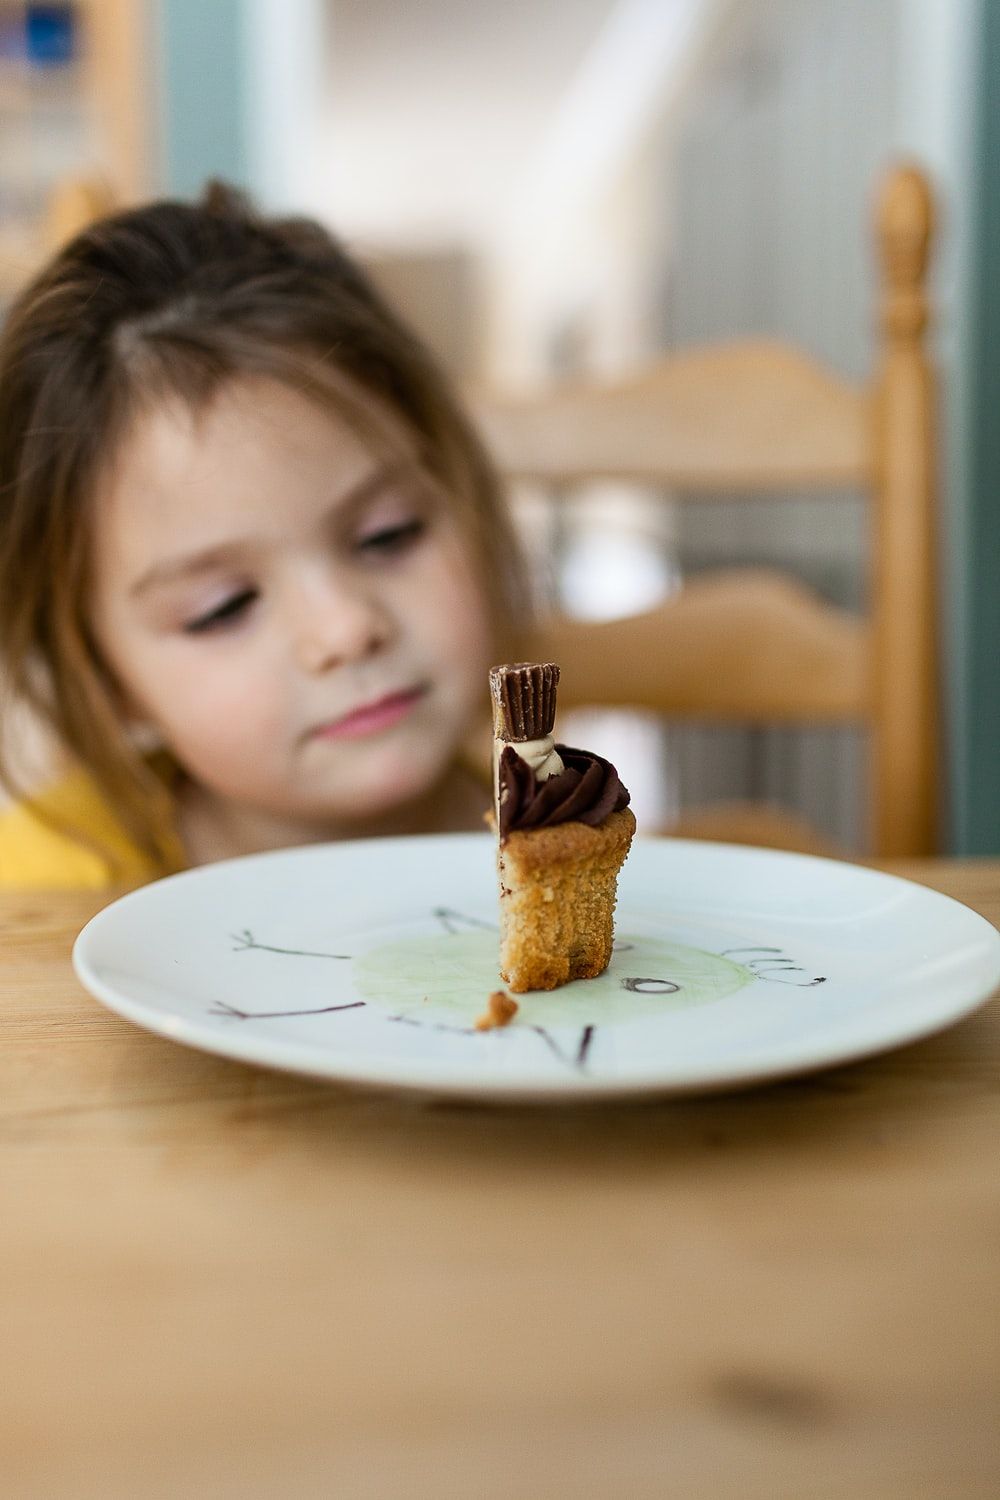 Children Eating Picture. Download Free Image